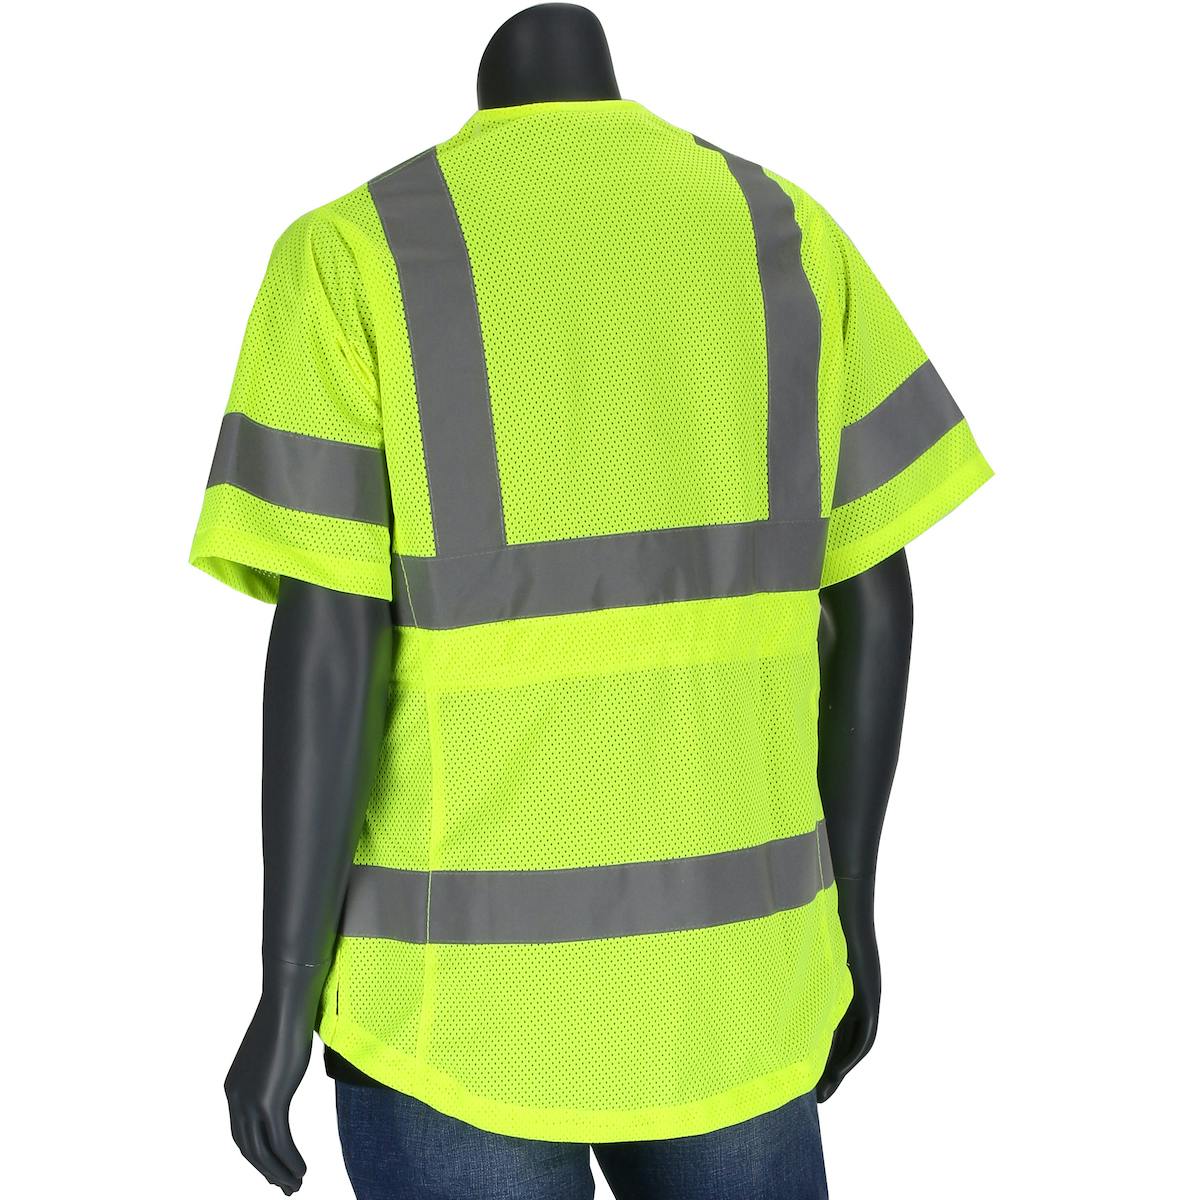 ANSI Type R Class 3 Women's Contoured Vest with Solid Front, Mesh Back and Adjustable Waist, Hi-Vis Yellow (303-0313)